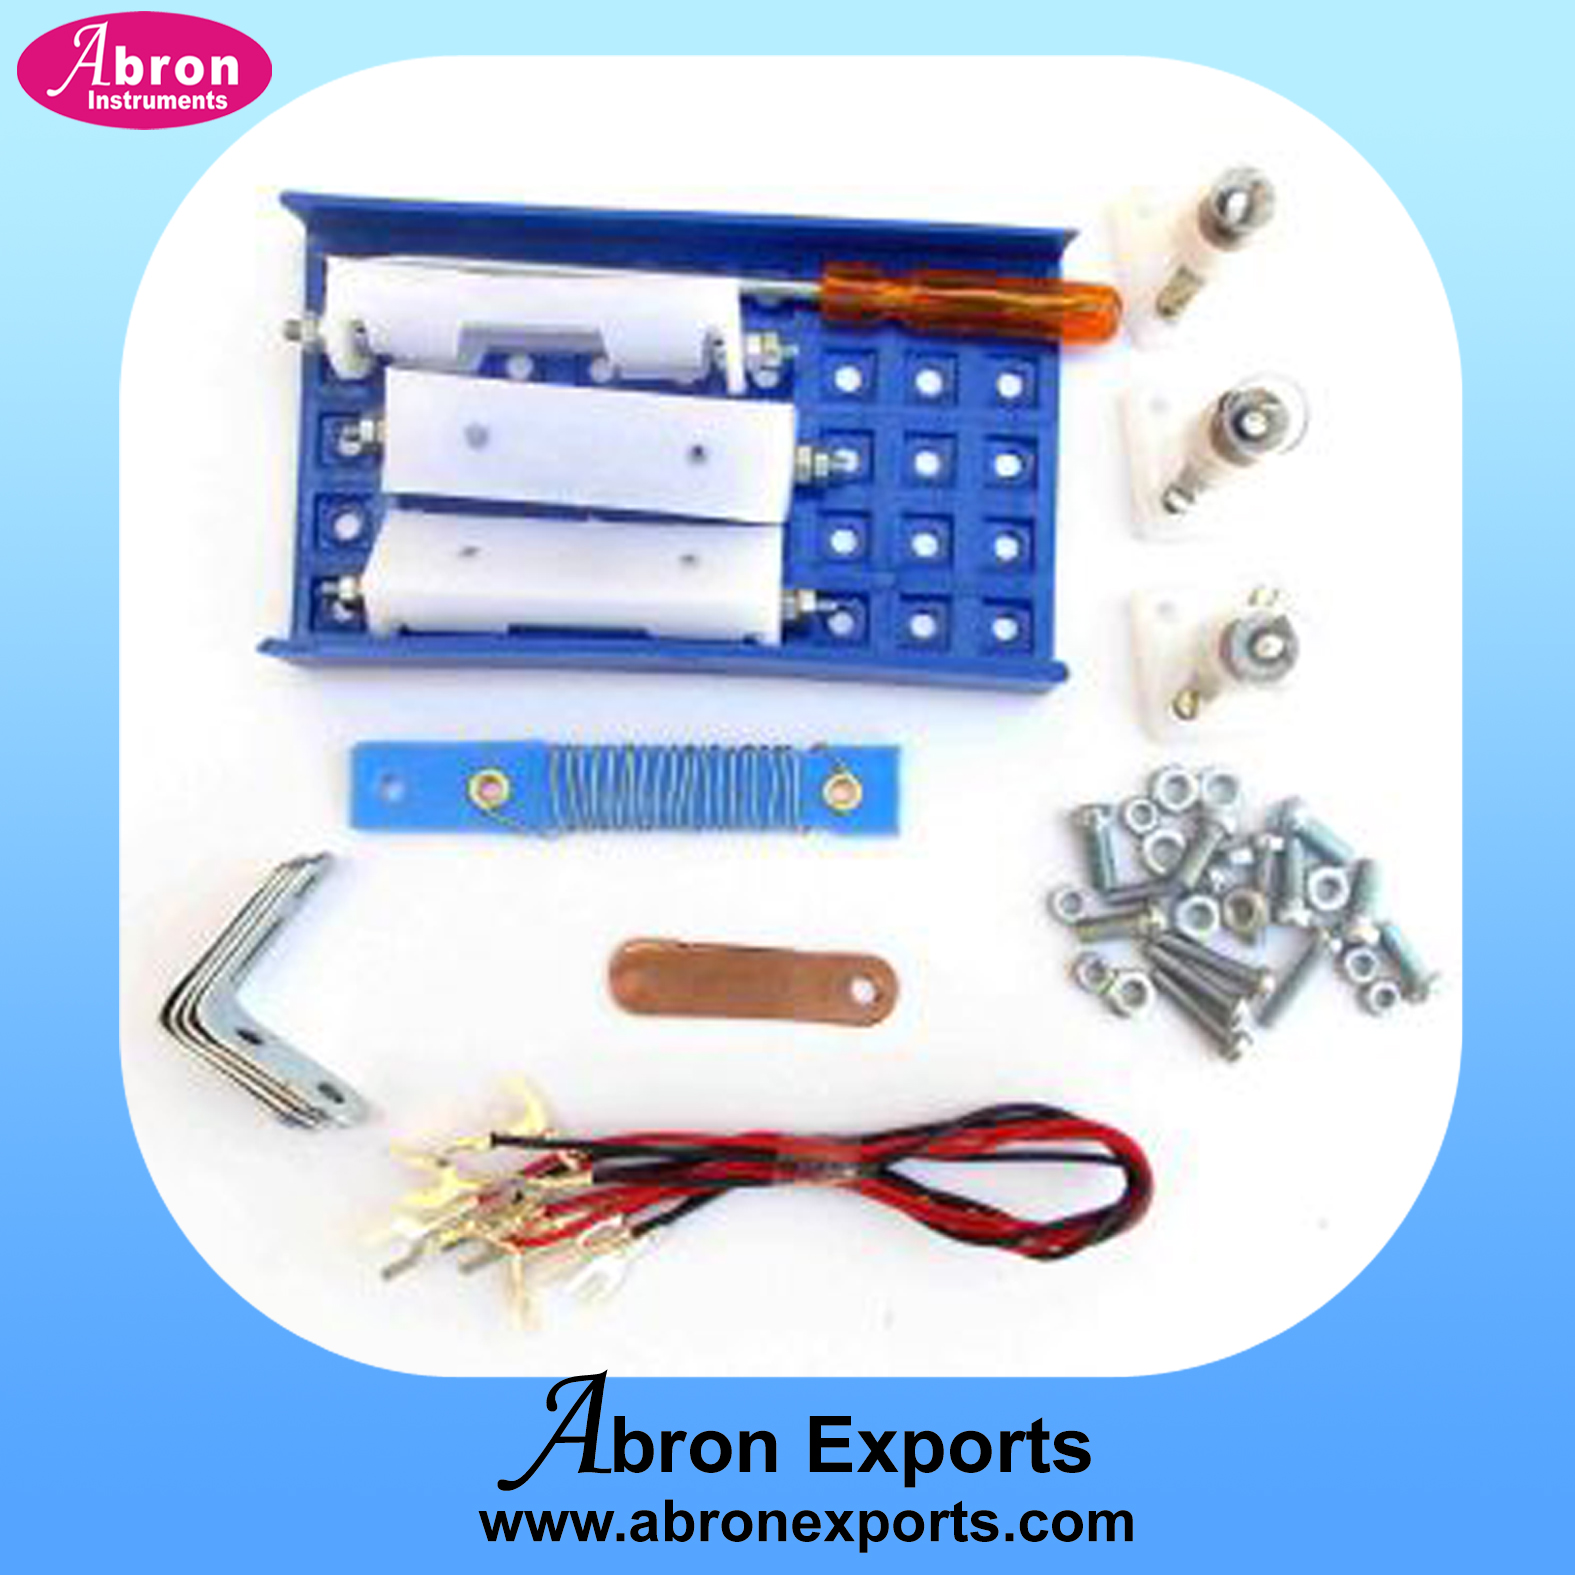 Electronic kit small westminster worcester circuit component abron spare loose basic AE-1224WS